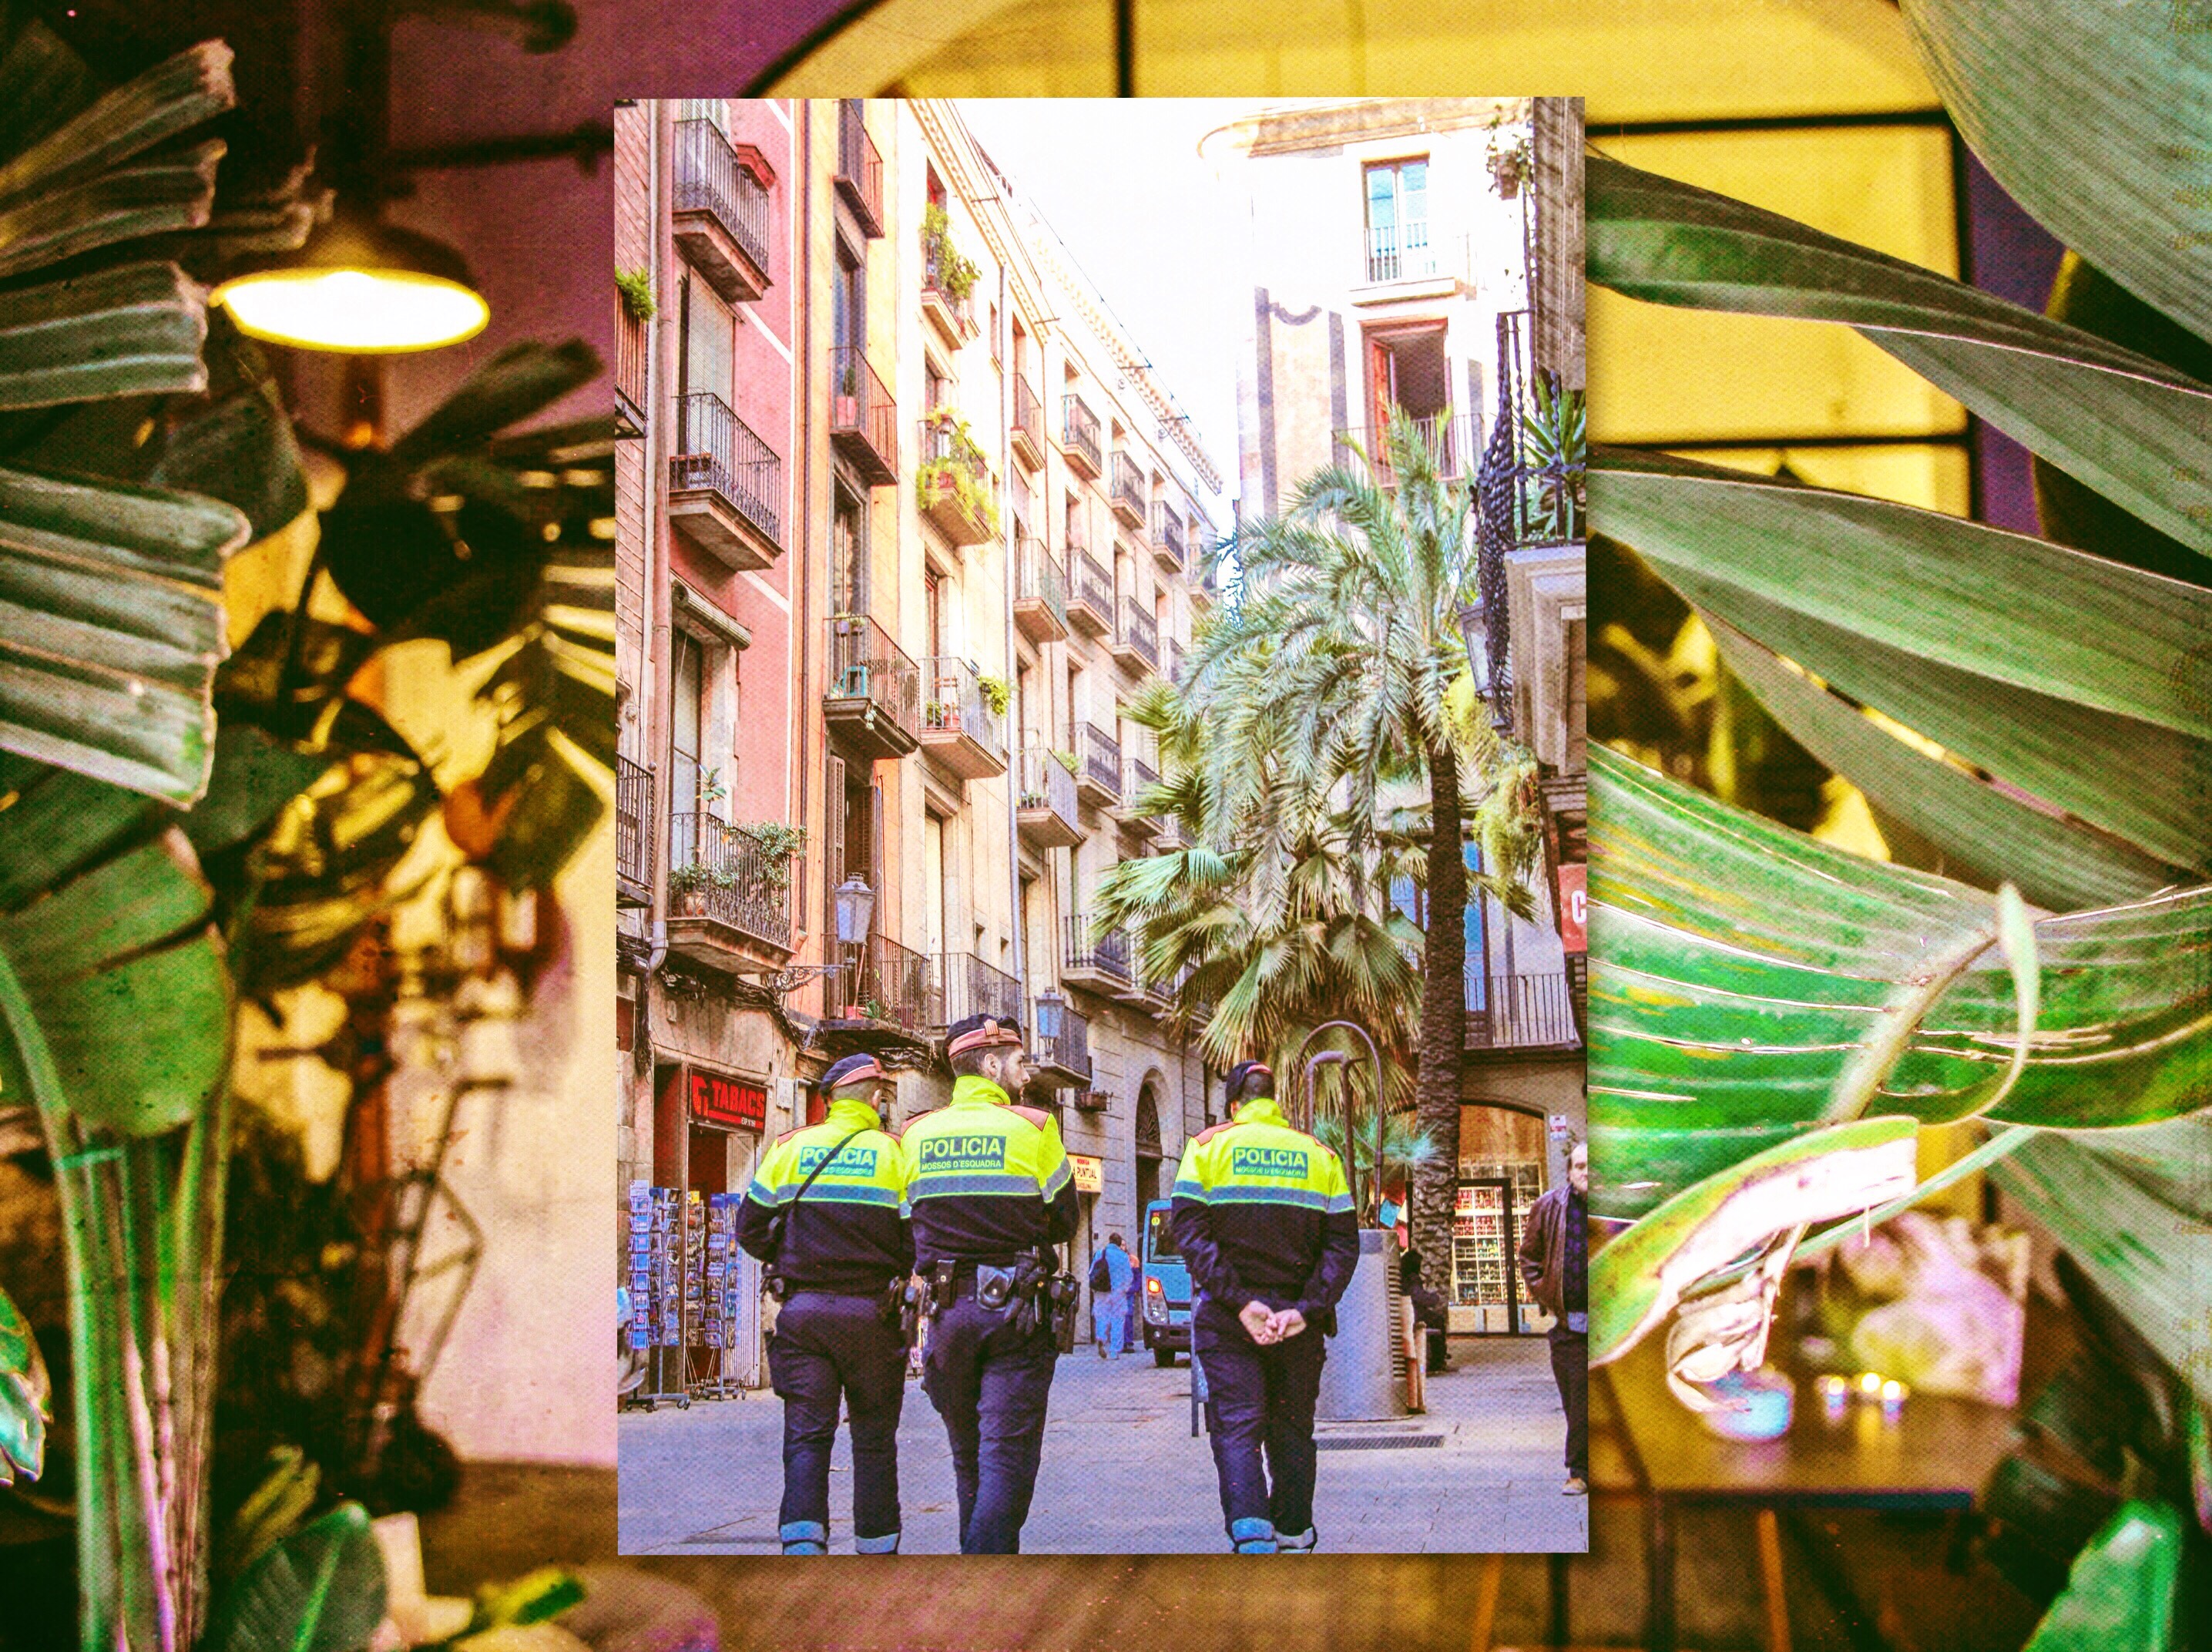 Policia - The palm trees and the bright colors all over Barcelona creates a serene atmosphere, even the police officers' uniforms compliment their surroundings. 